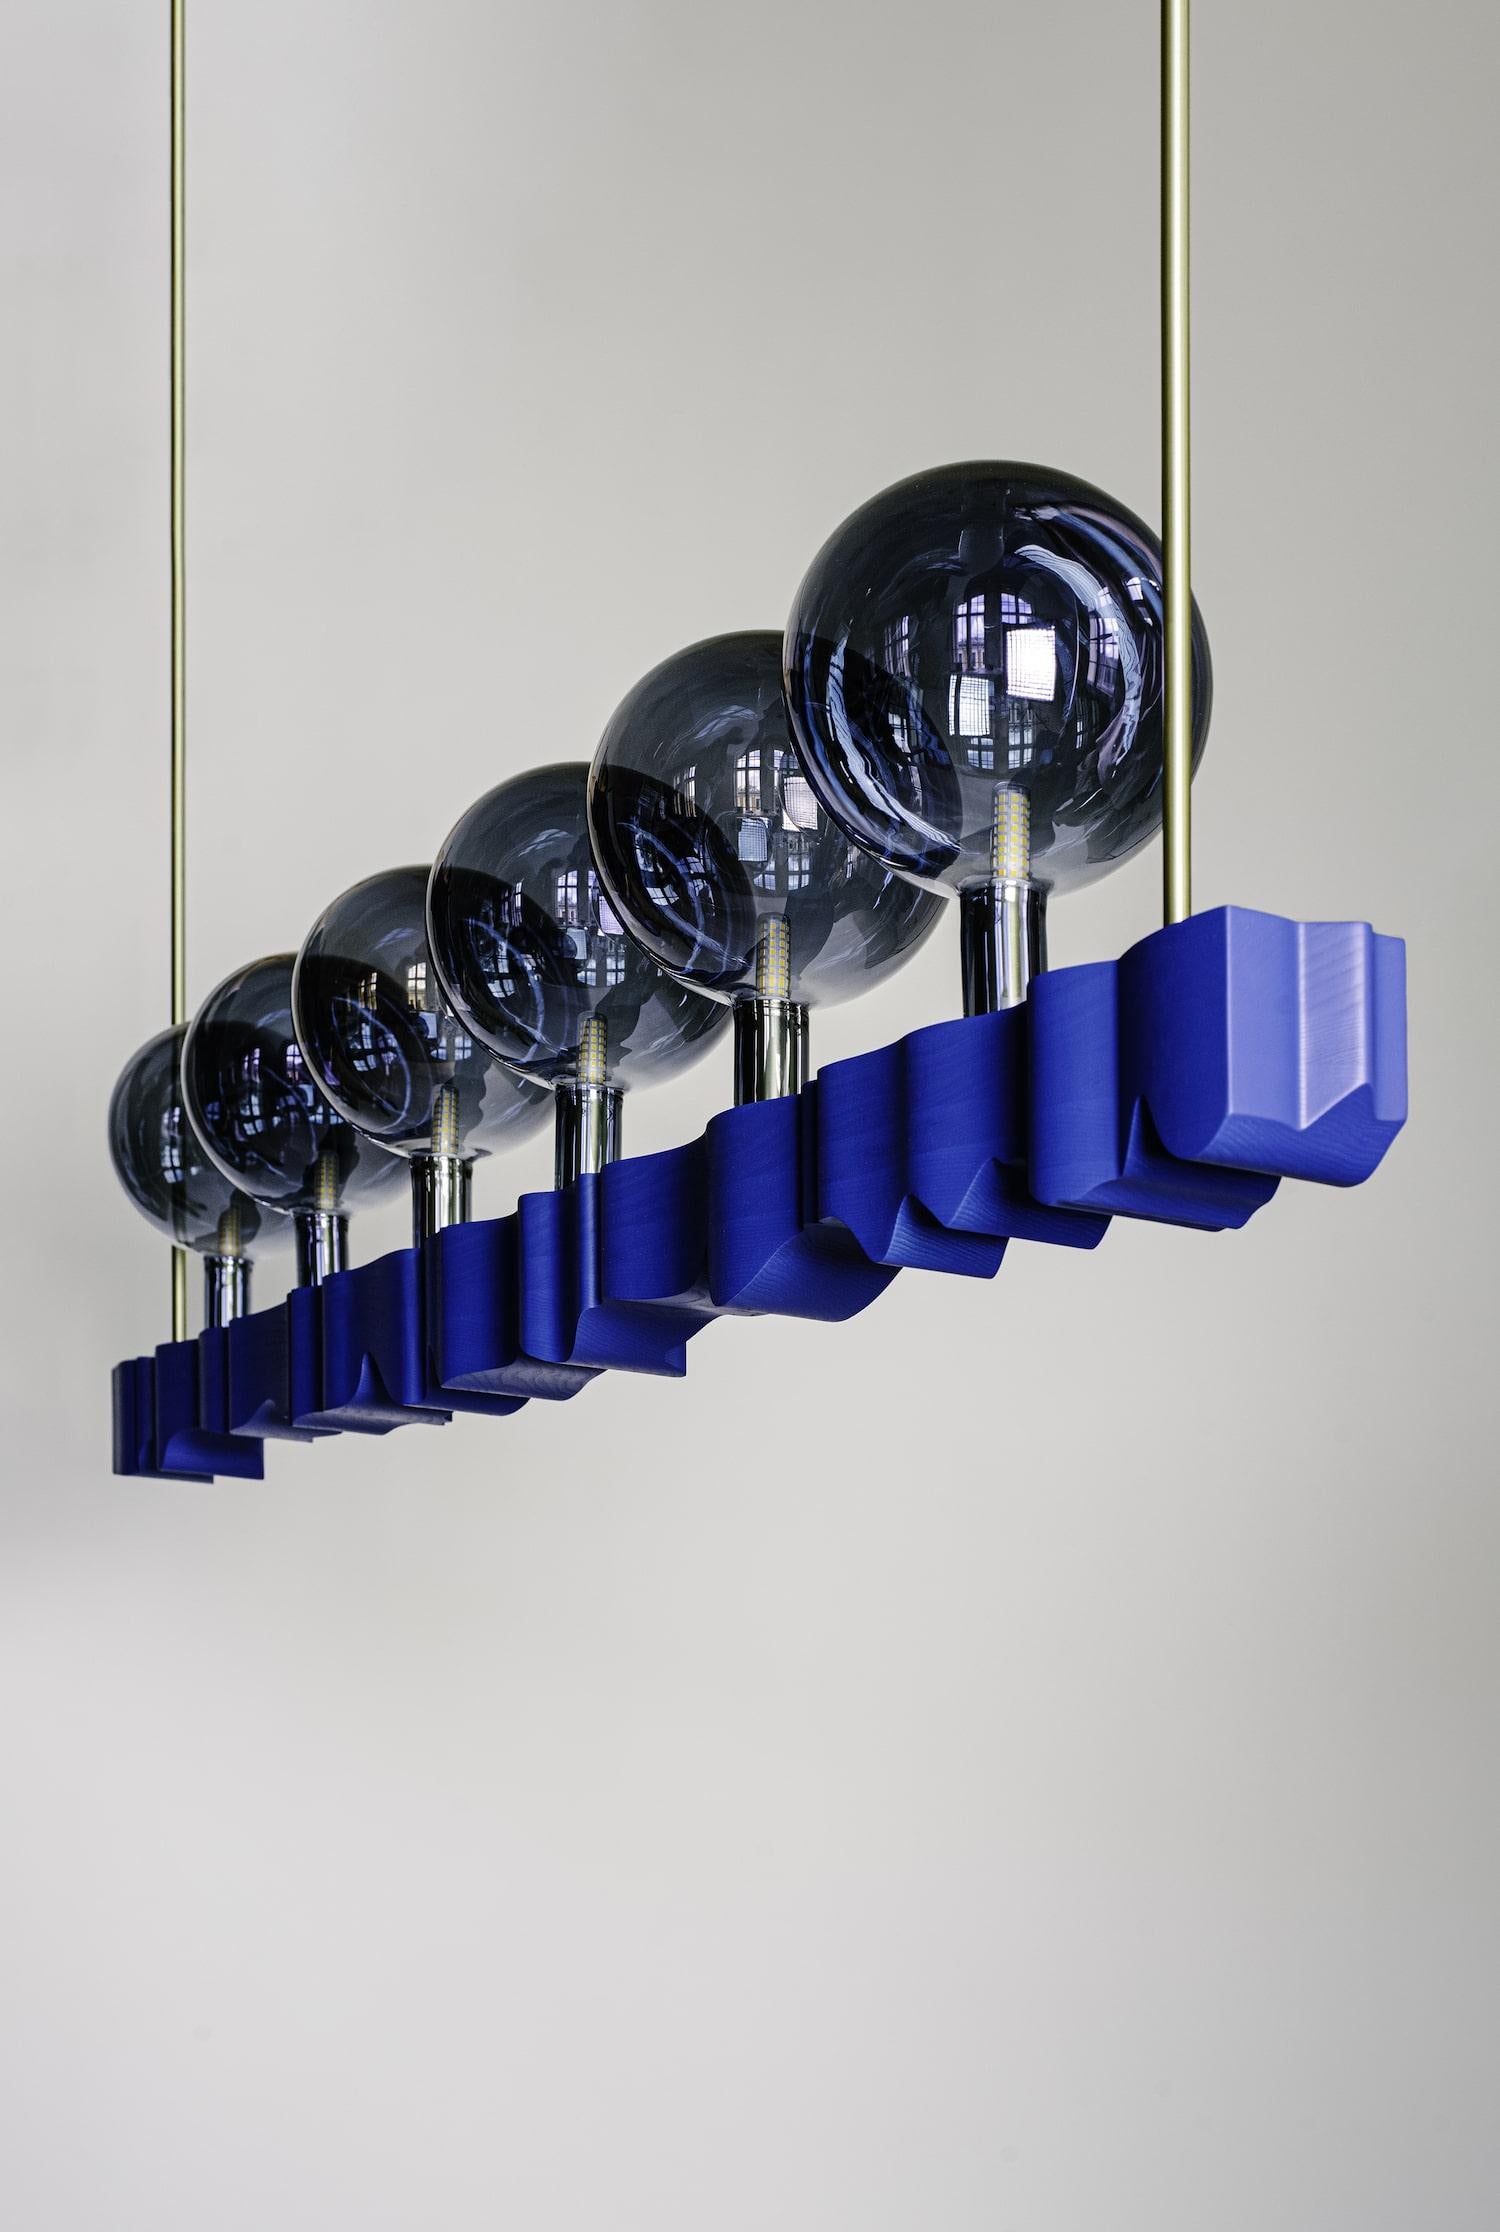 The monumental luminaire made of lacquered solid as wood in combination with brass construction and metal coated glass spheres. The aesthetics of the chandelier is an expressive interpretation and reference to the work of Czech architect Jan Kotěra